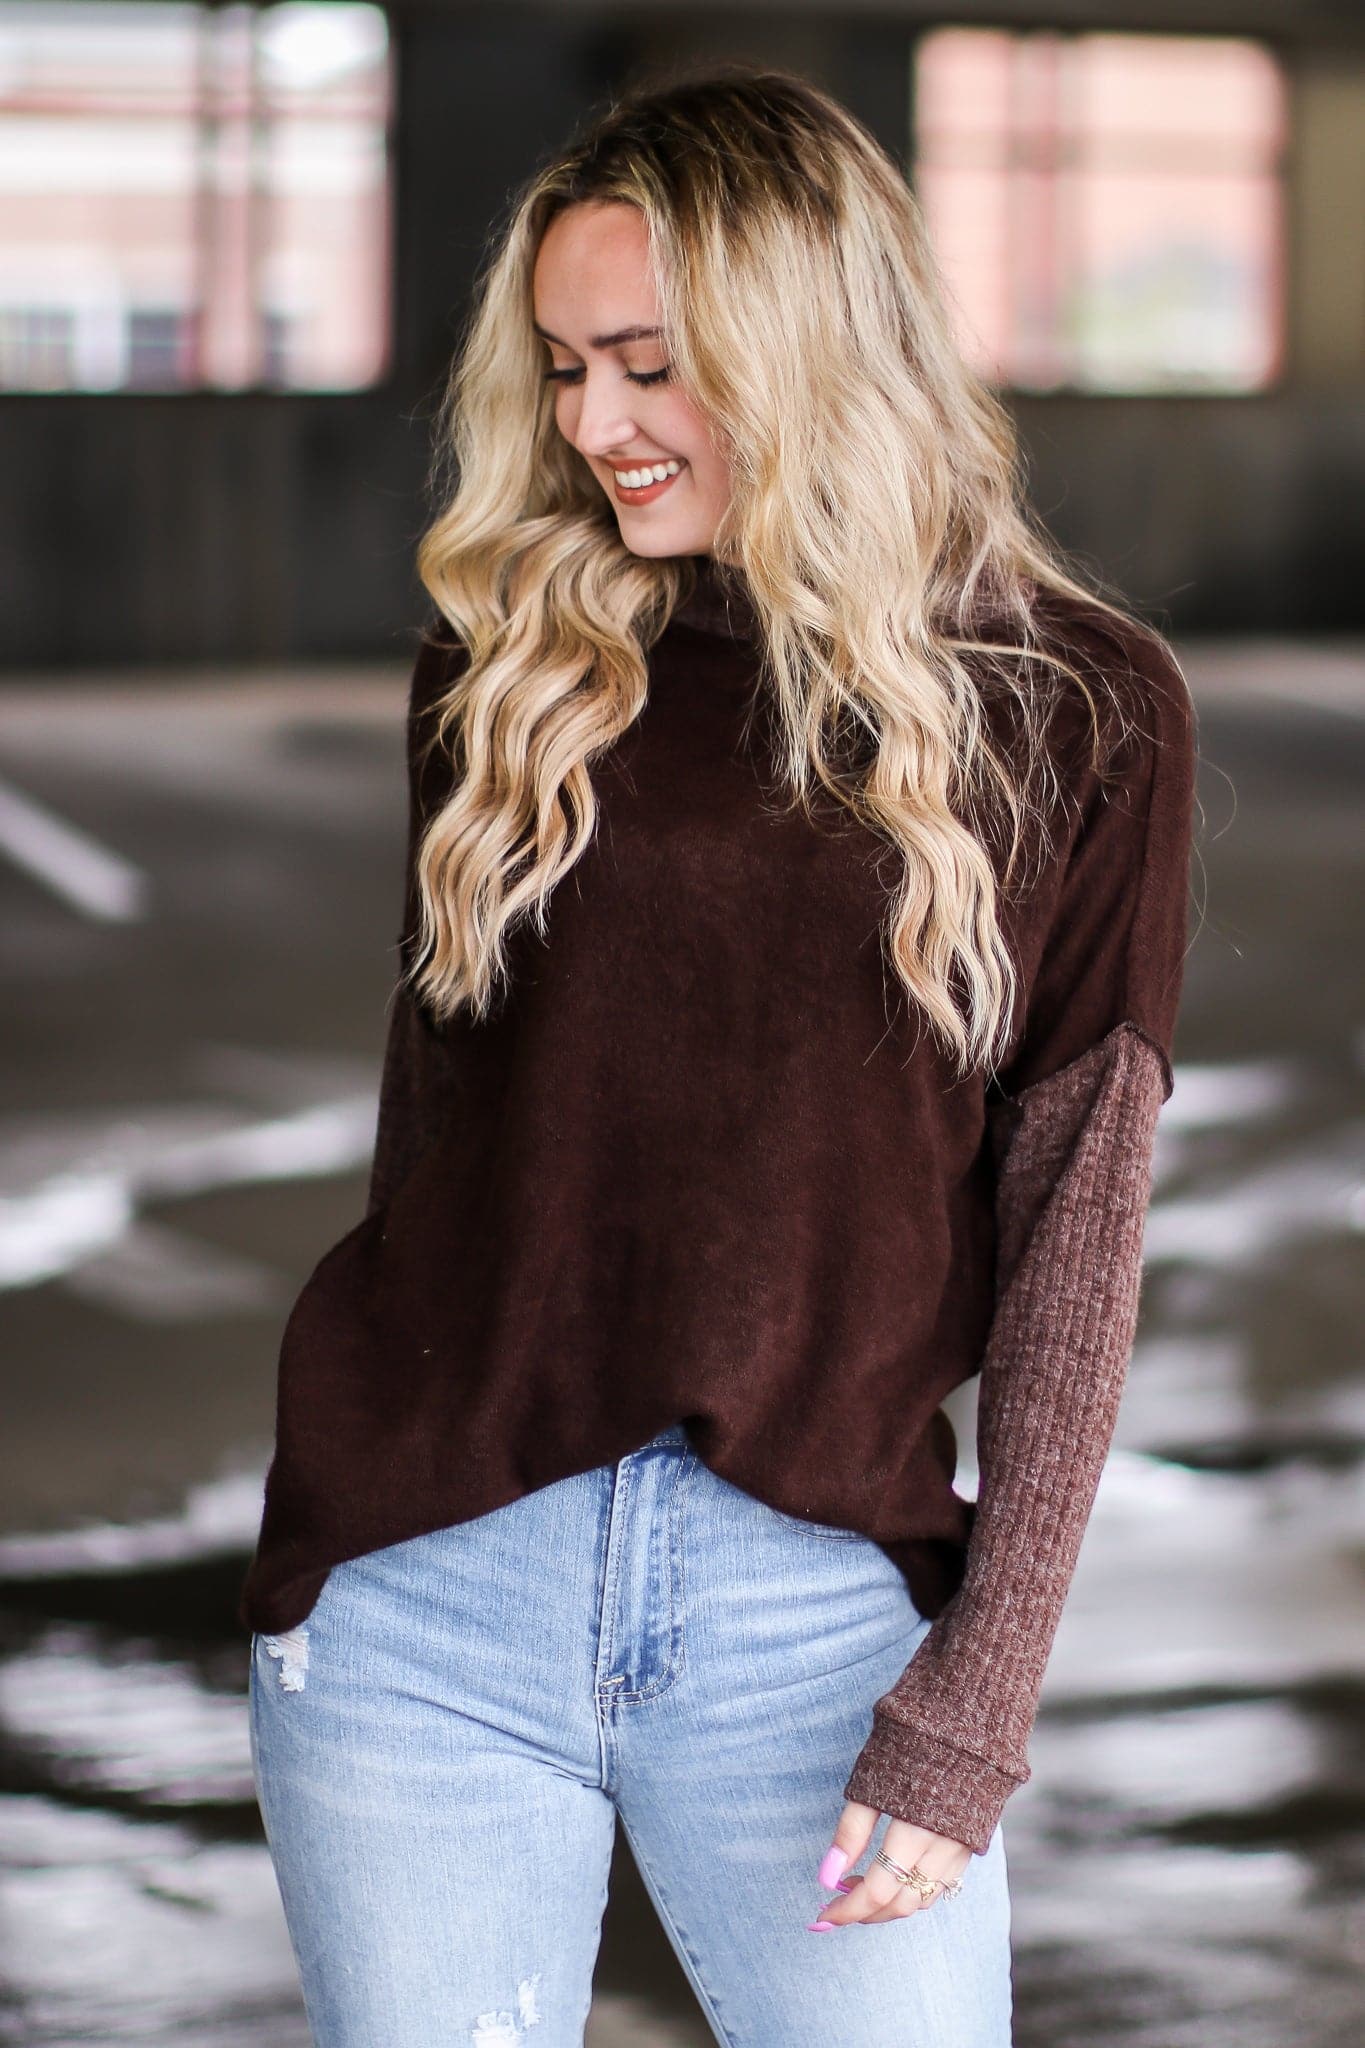  Loving Arms Ribbed Knit Contrast Sweater - FINAL SALE - Madison and Mallory